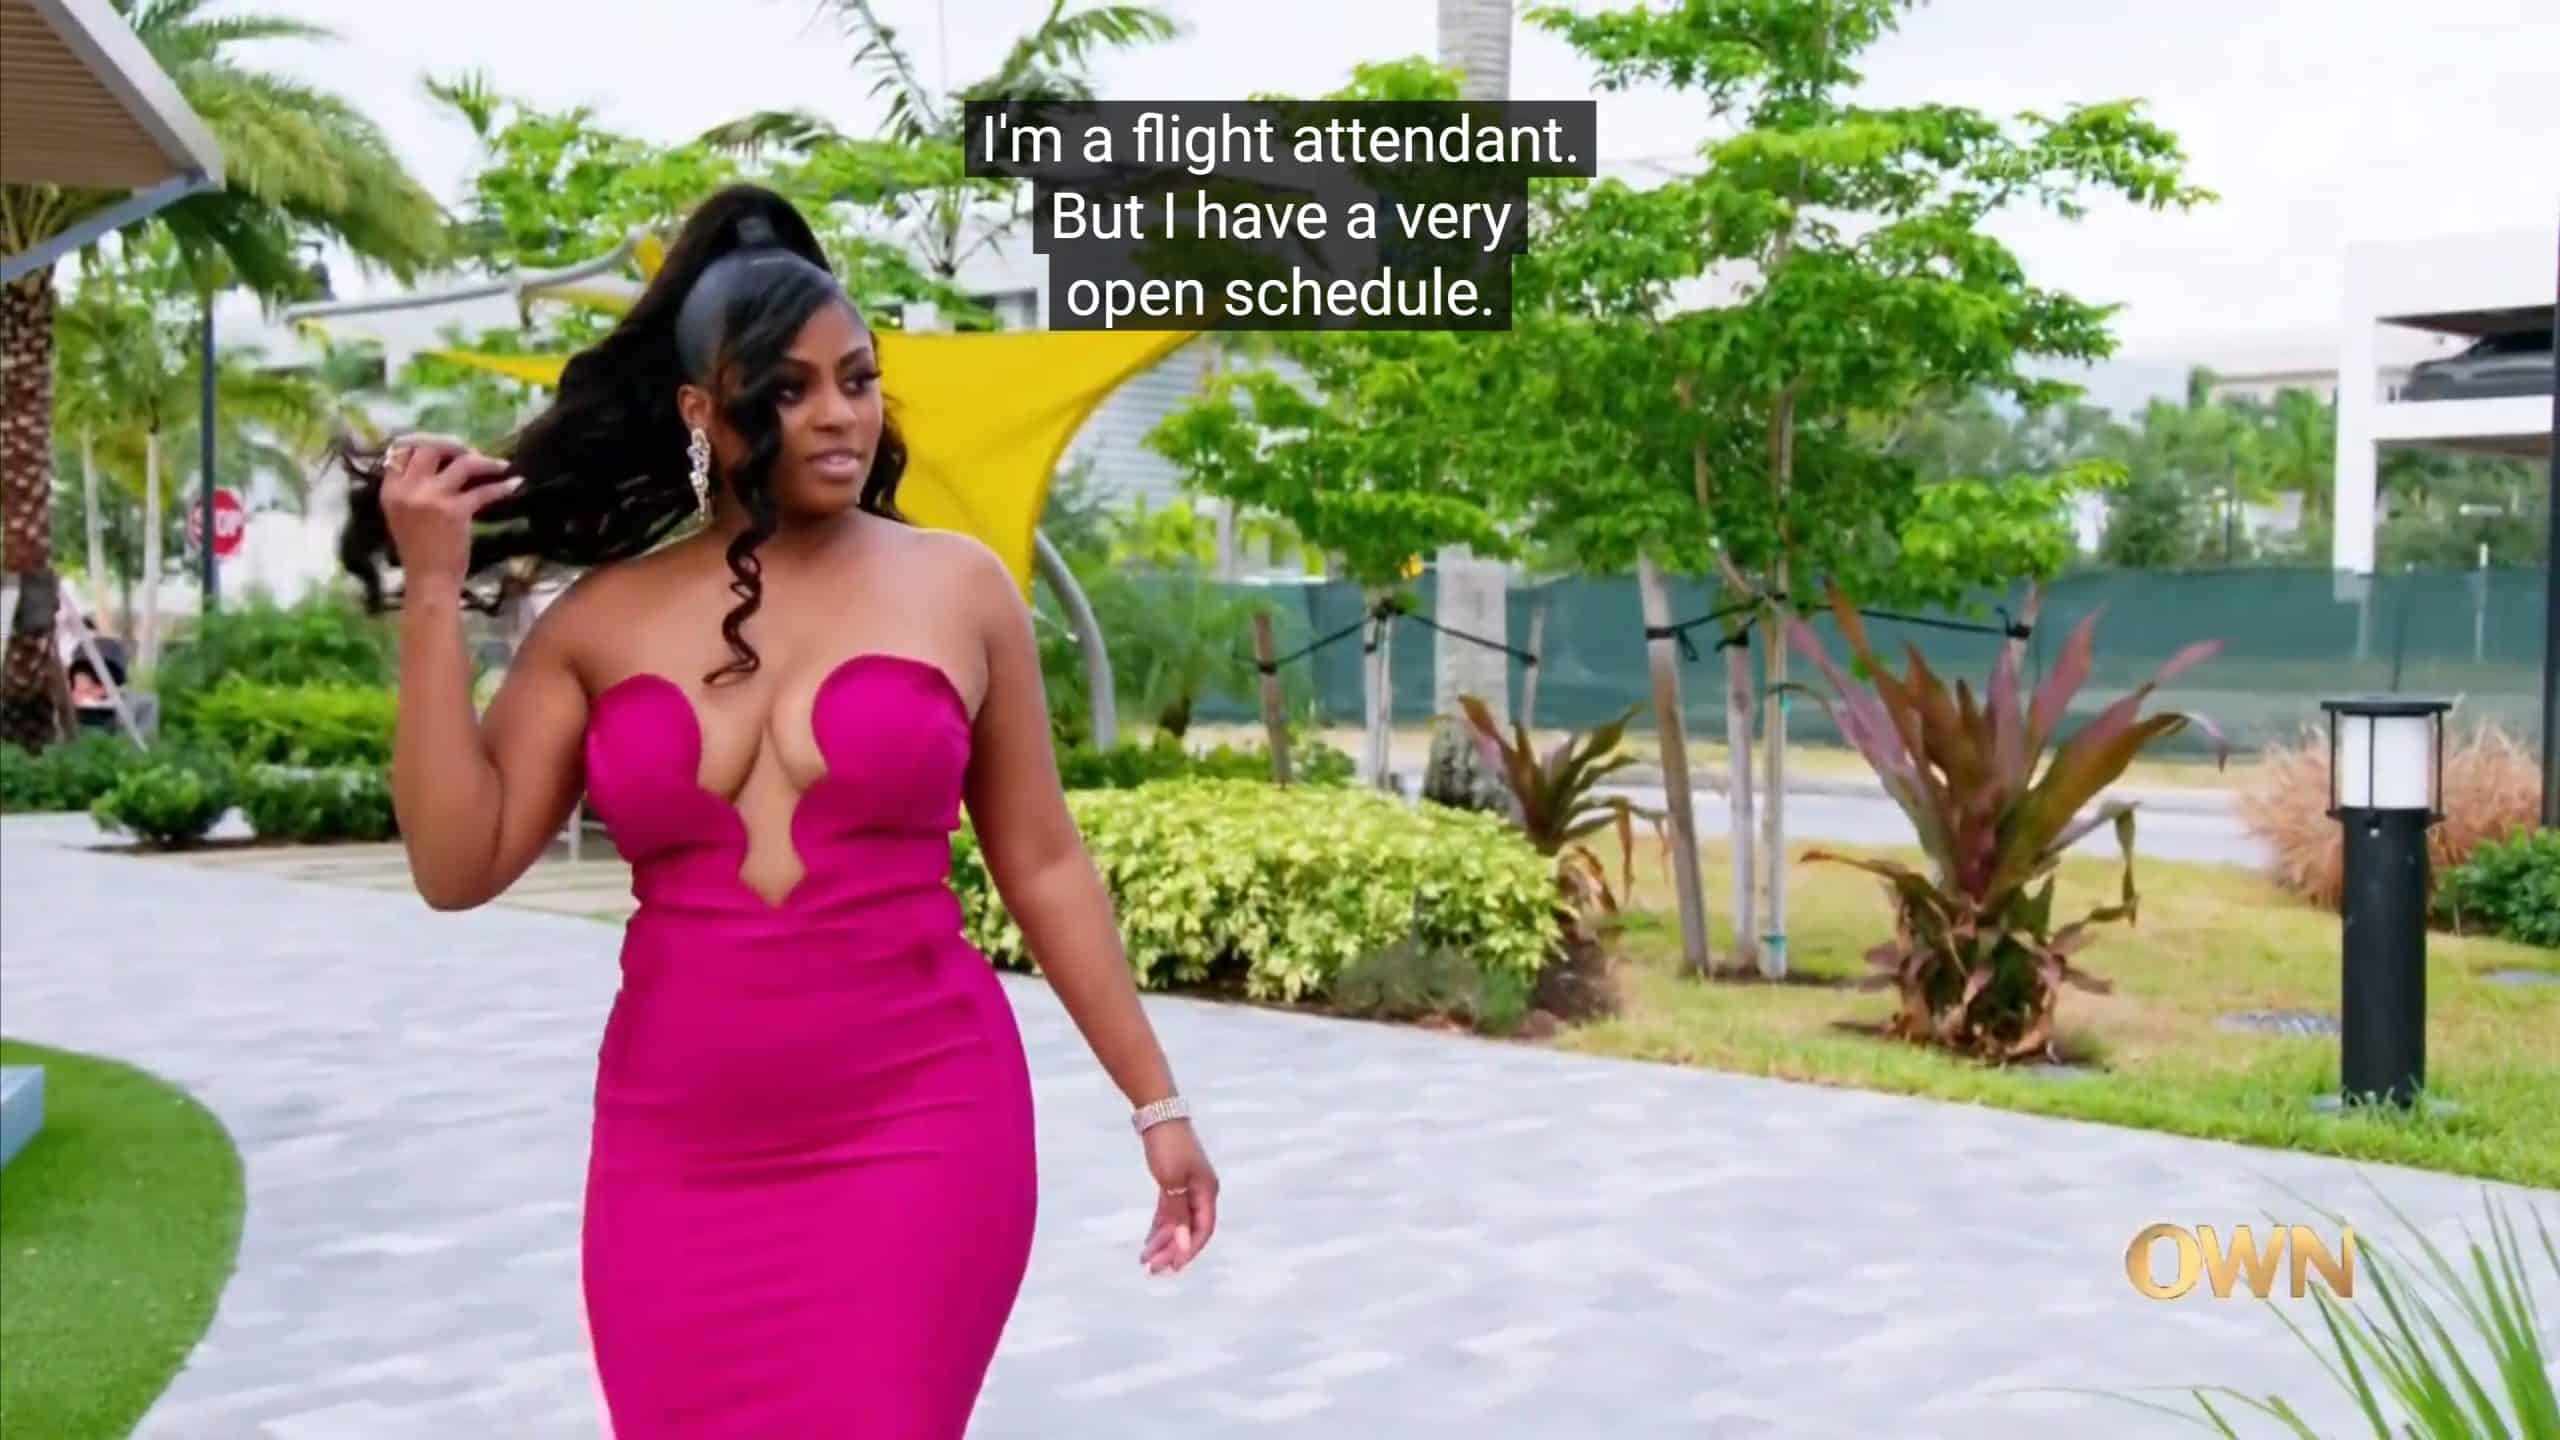 Brandi arriving for the mixer